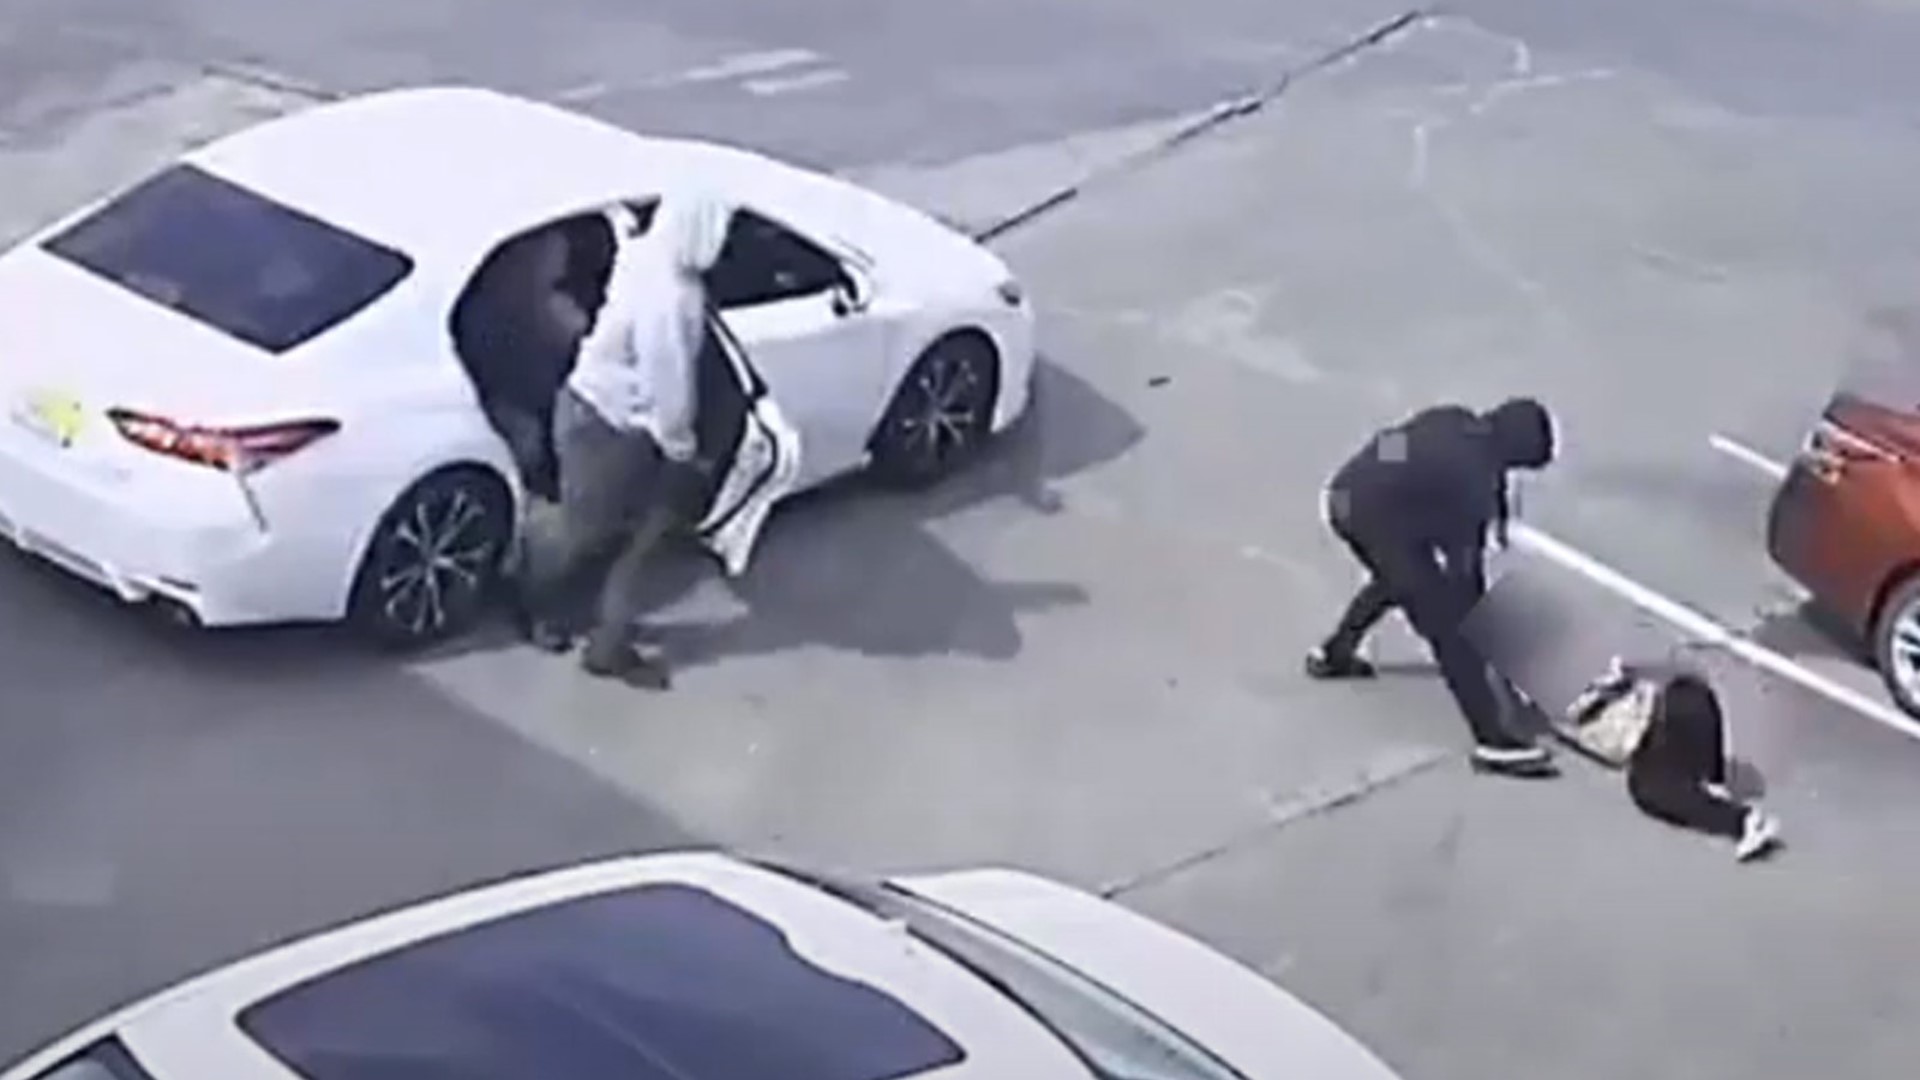 A woman was dragged through a parking lot last month as she held tightly to her purse, and now Houston police have released the video in hopes of making an arrest.